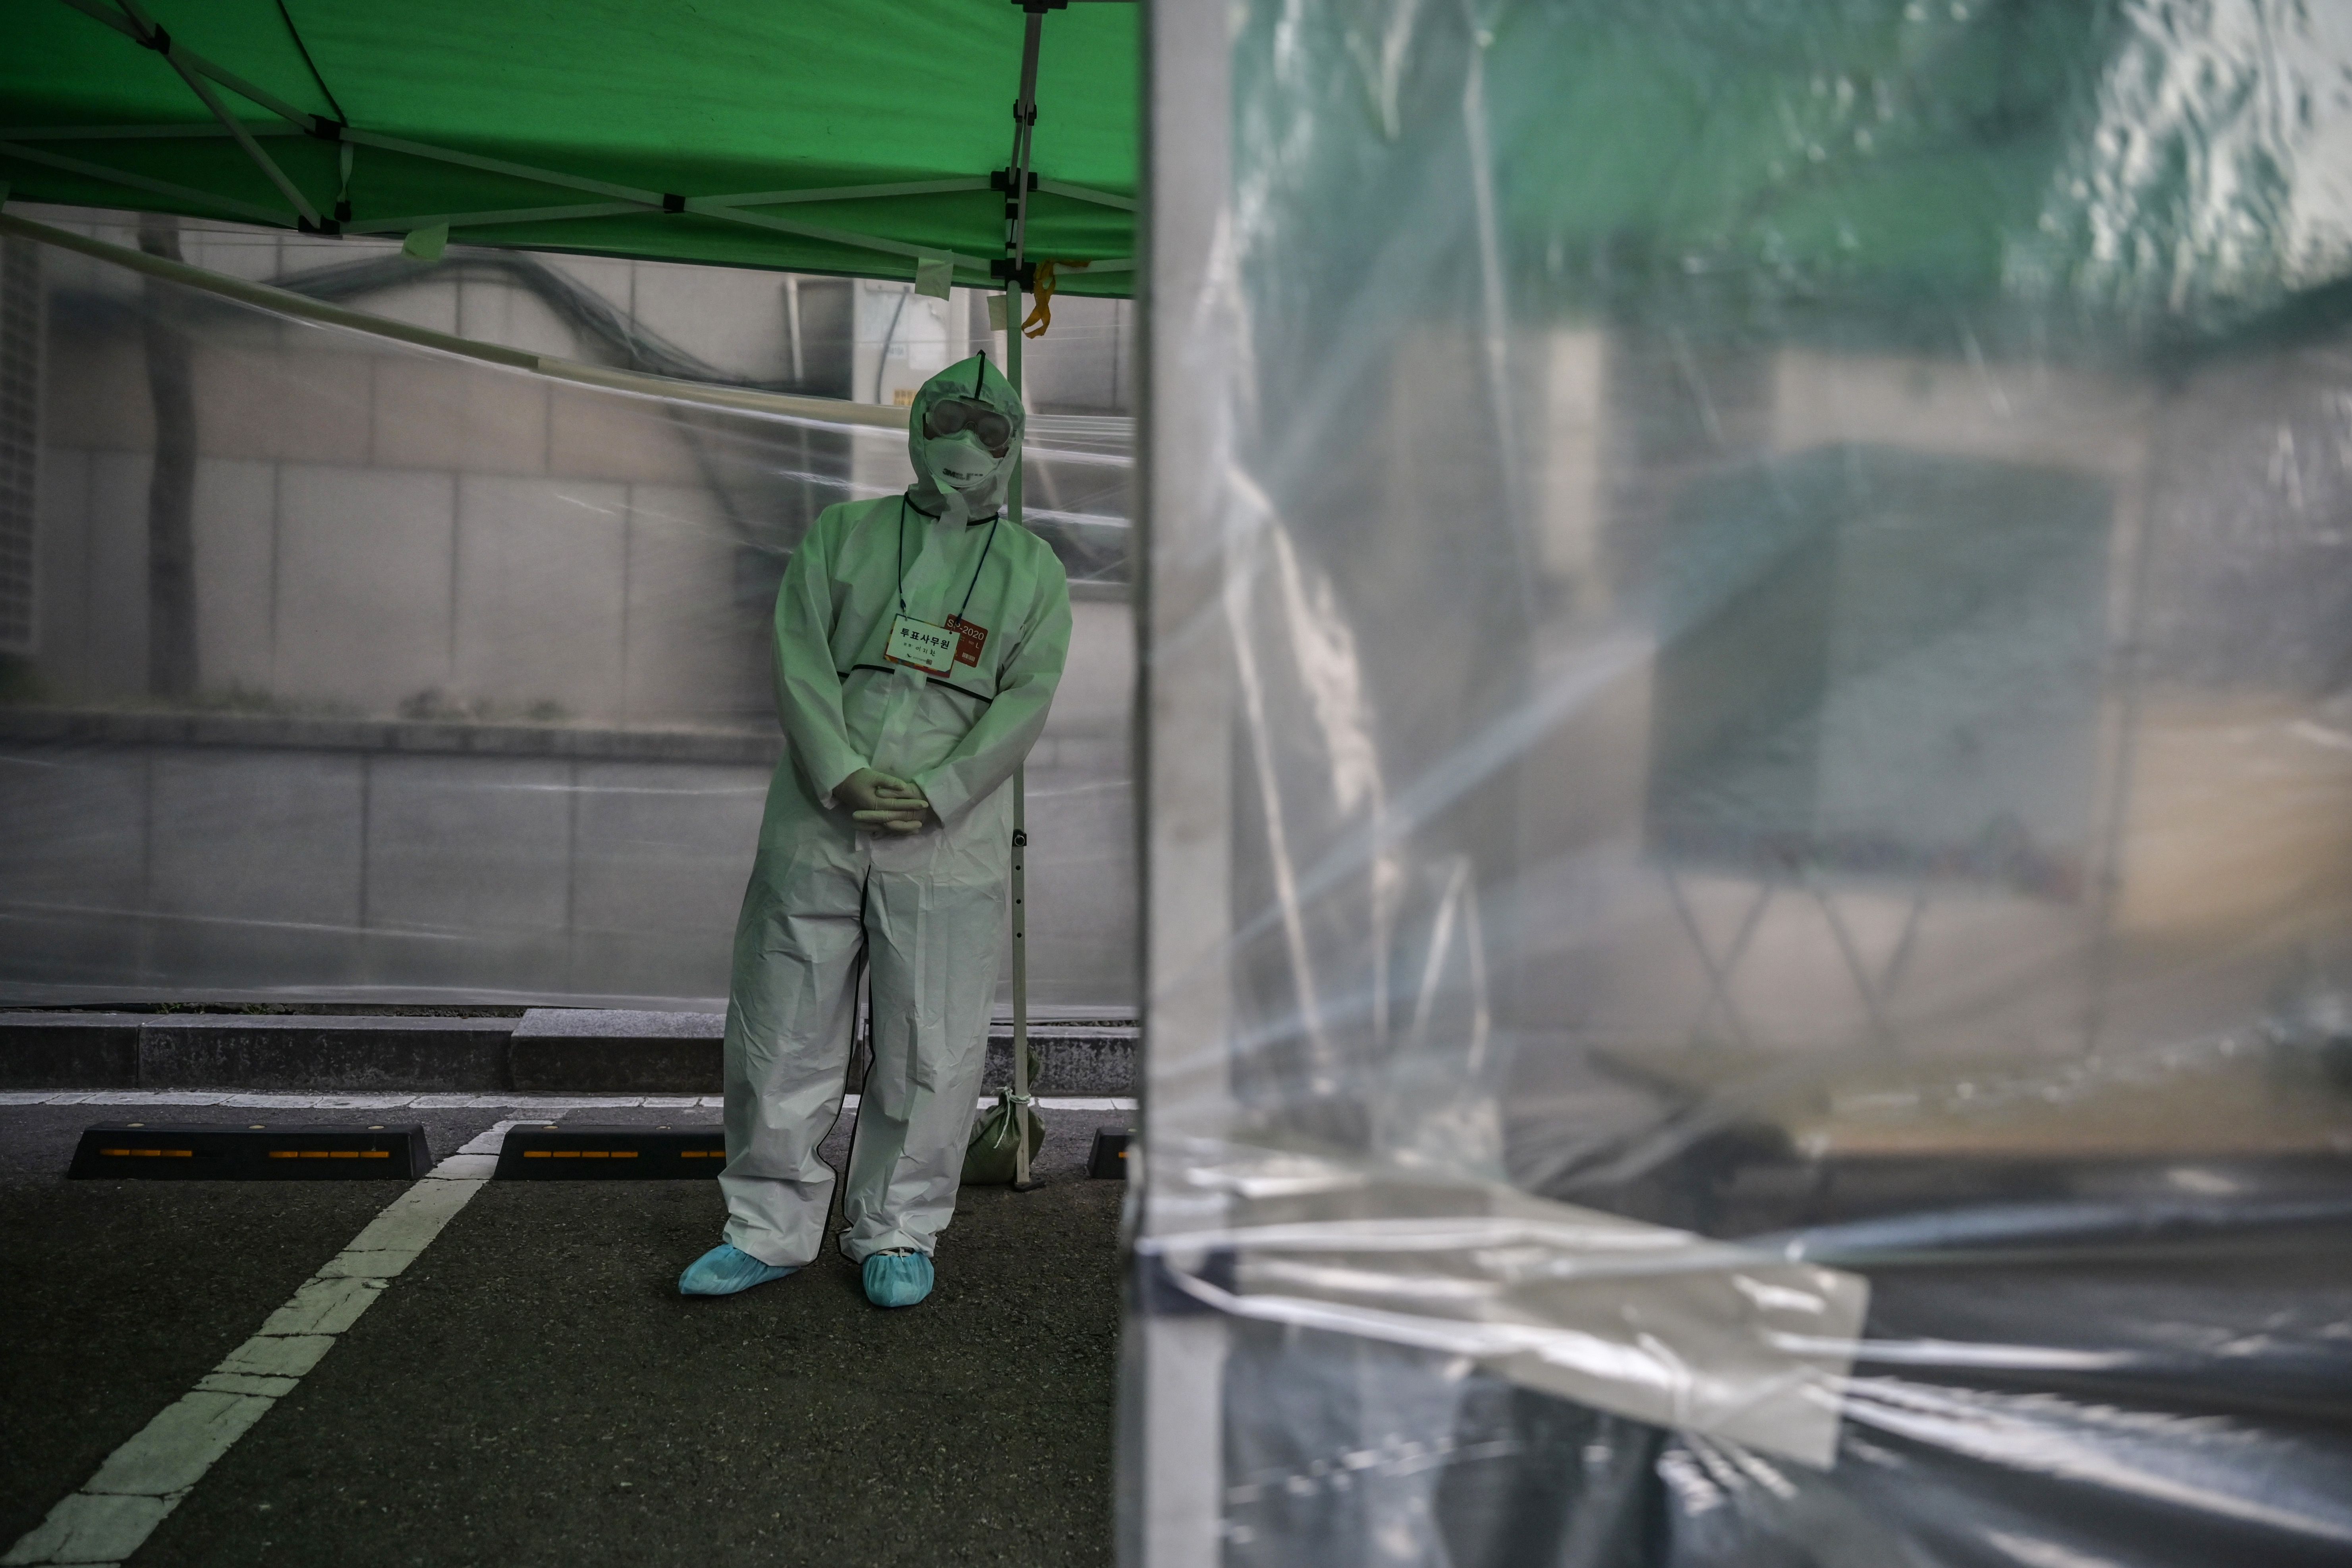 In this image, a man in hazmat gear stands in a clear plastic tent